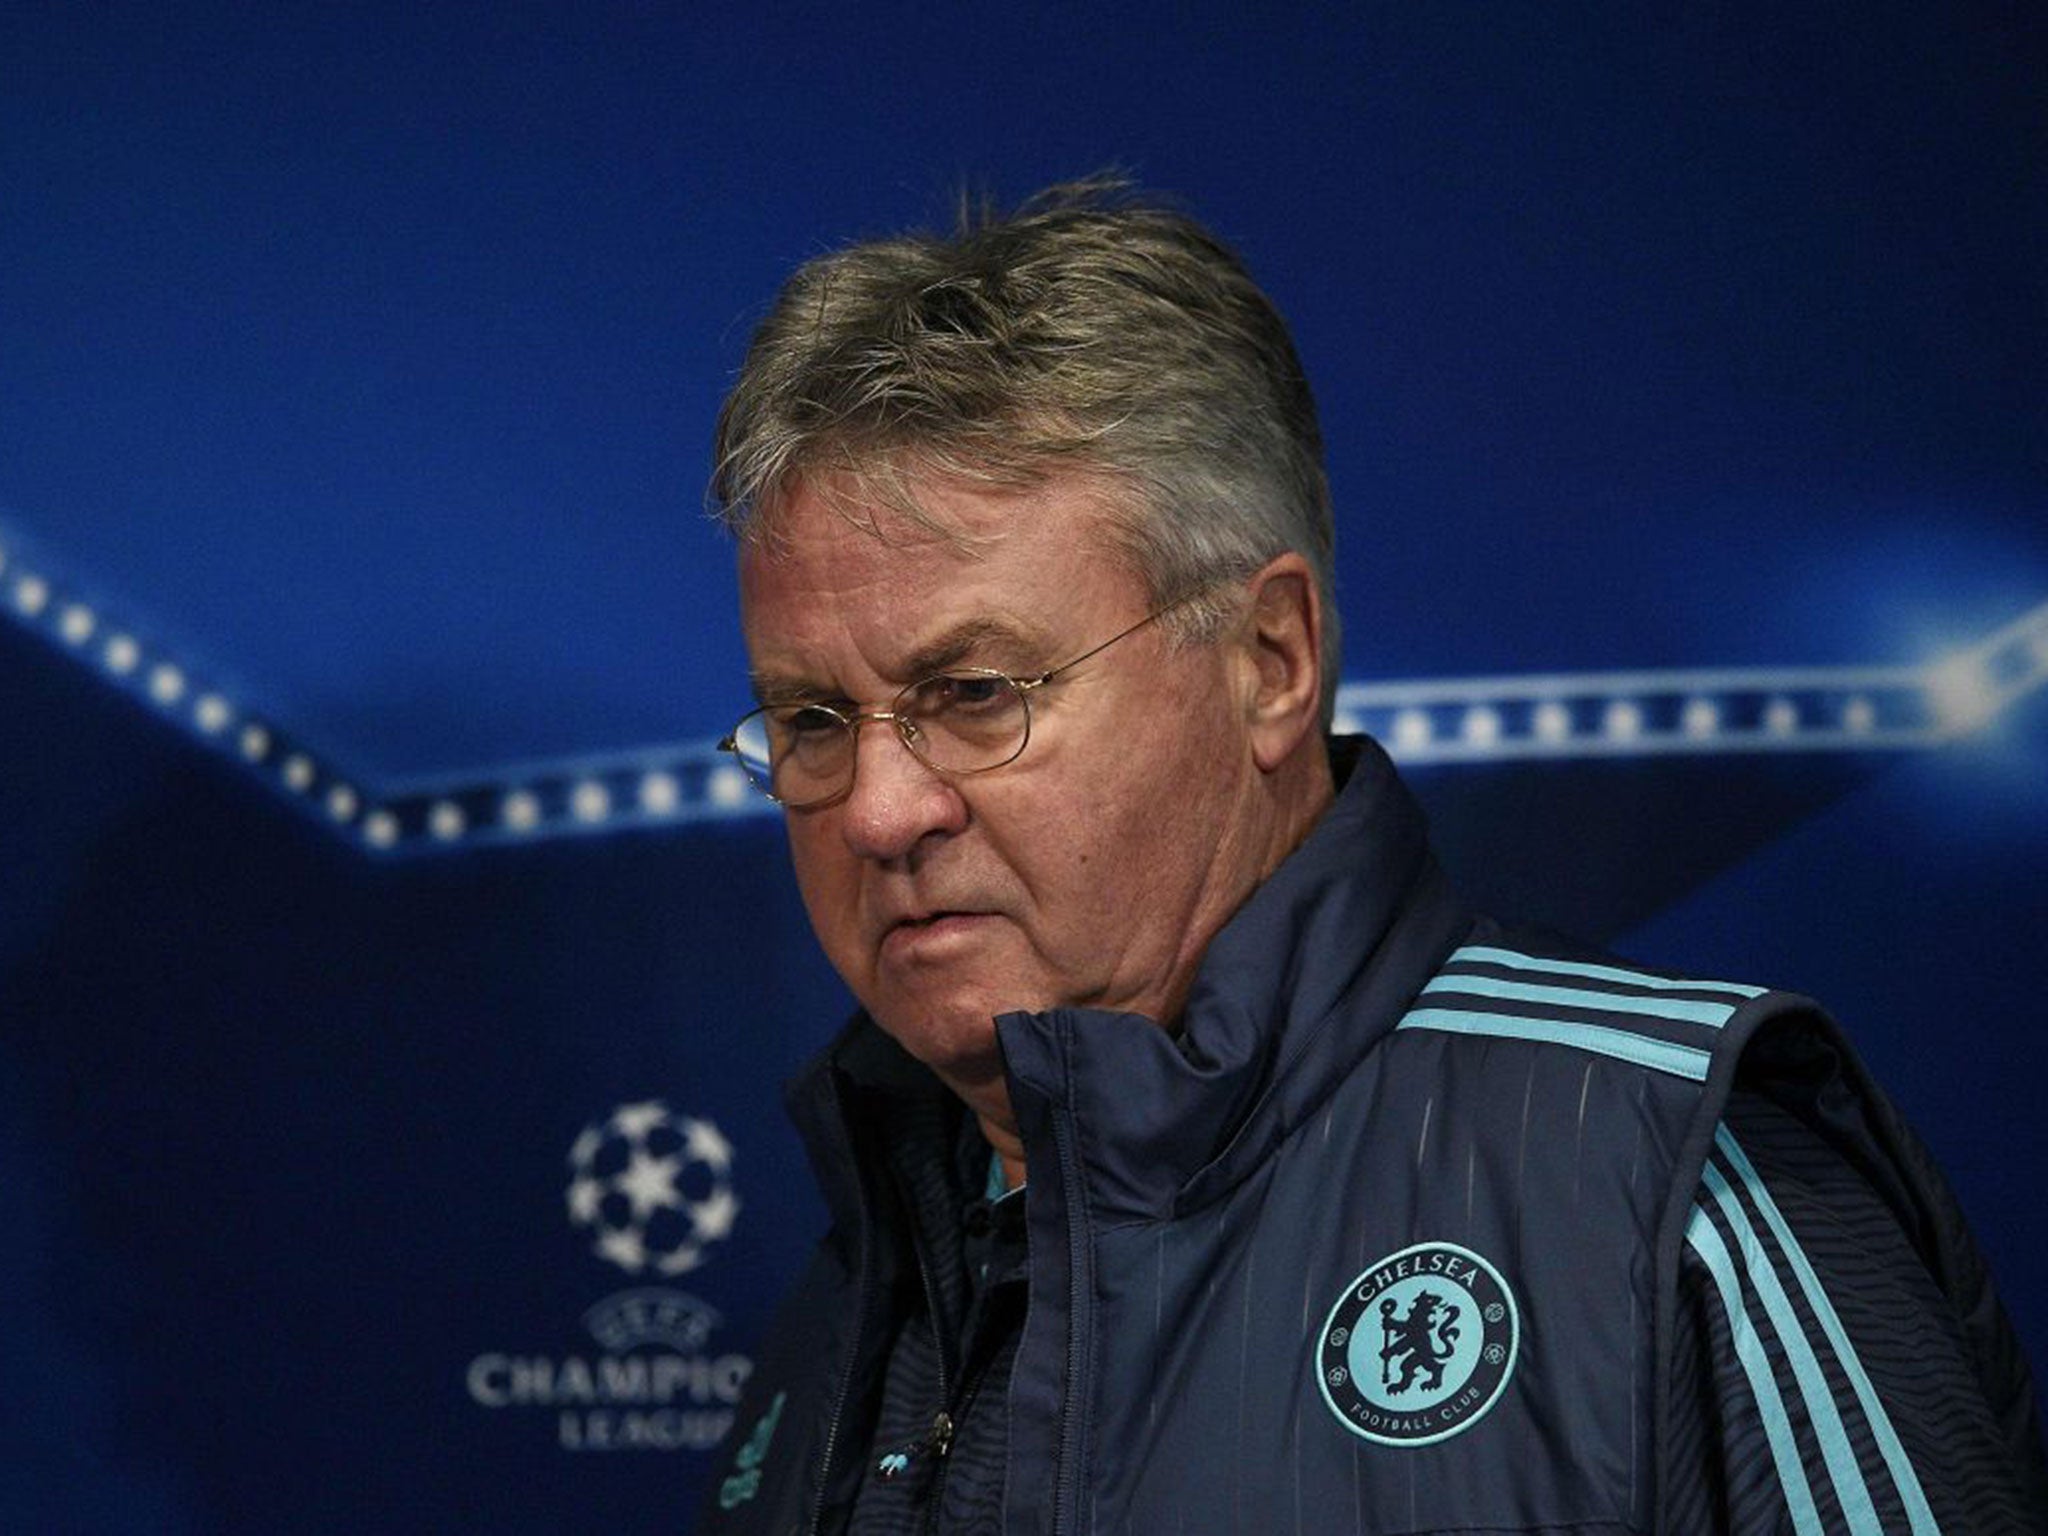 Hiddink's return to Chelsea offers him a personal shot at redemption in the Champions League